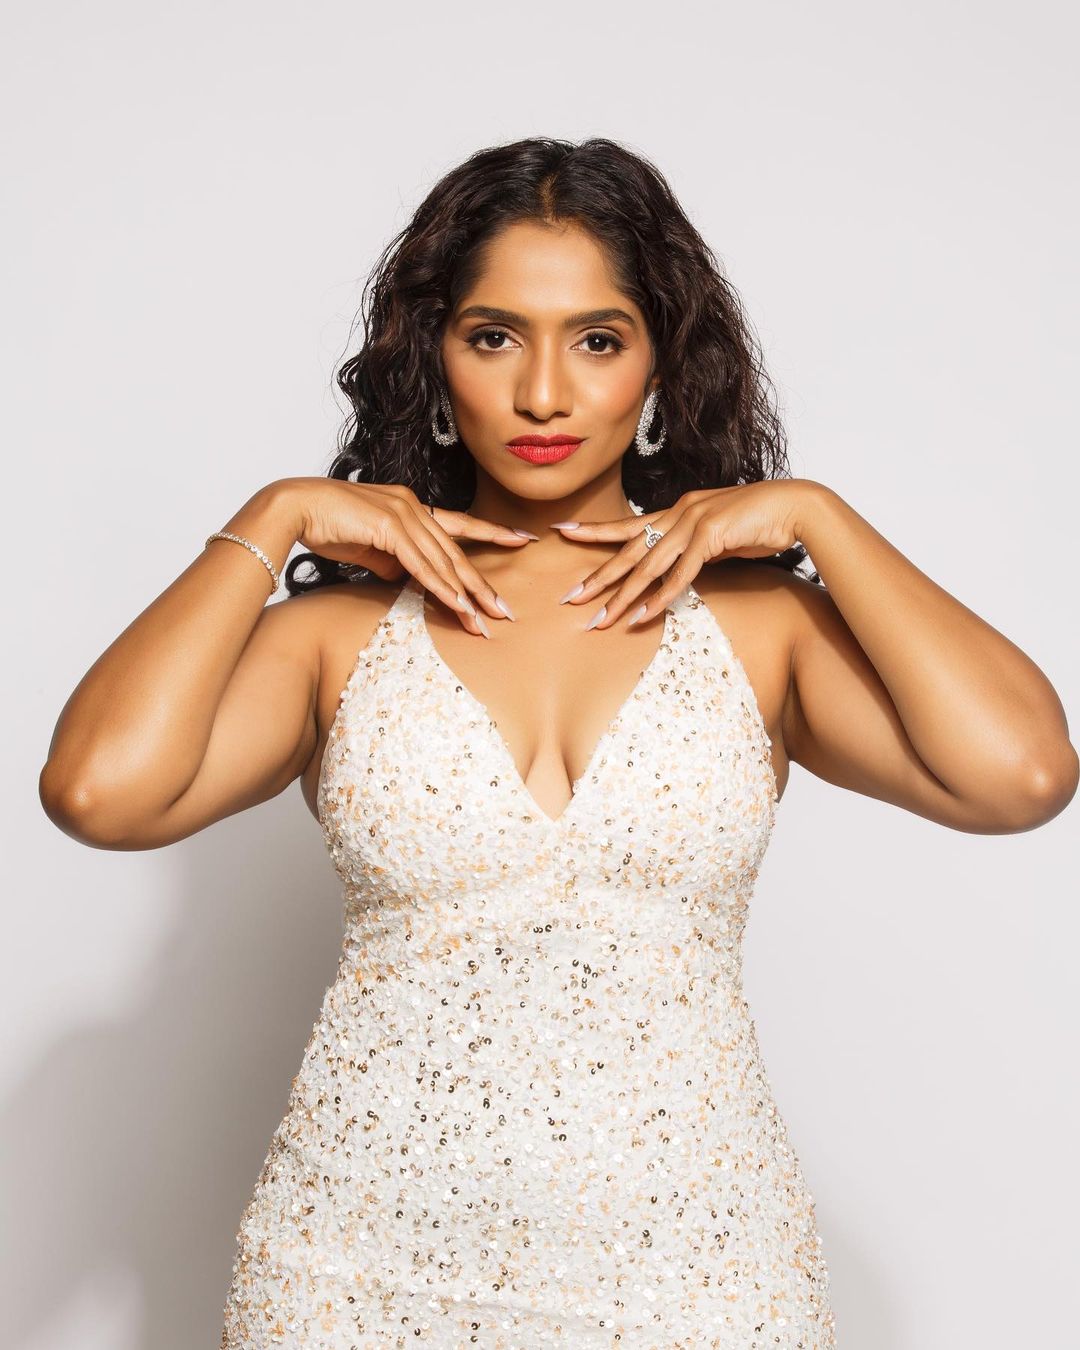 Johnny Lever daughter Jamie Lever 4